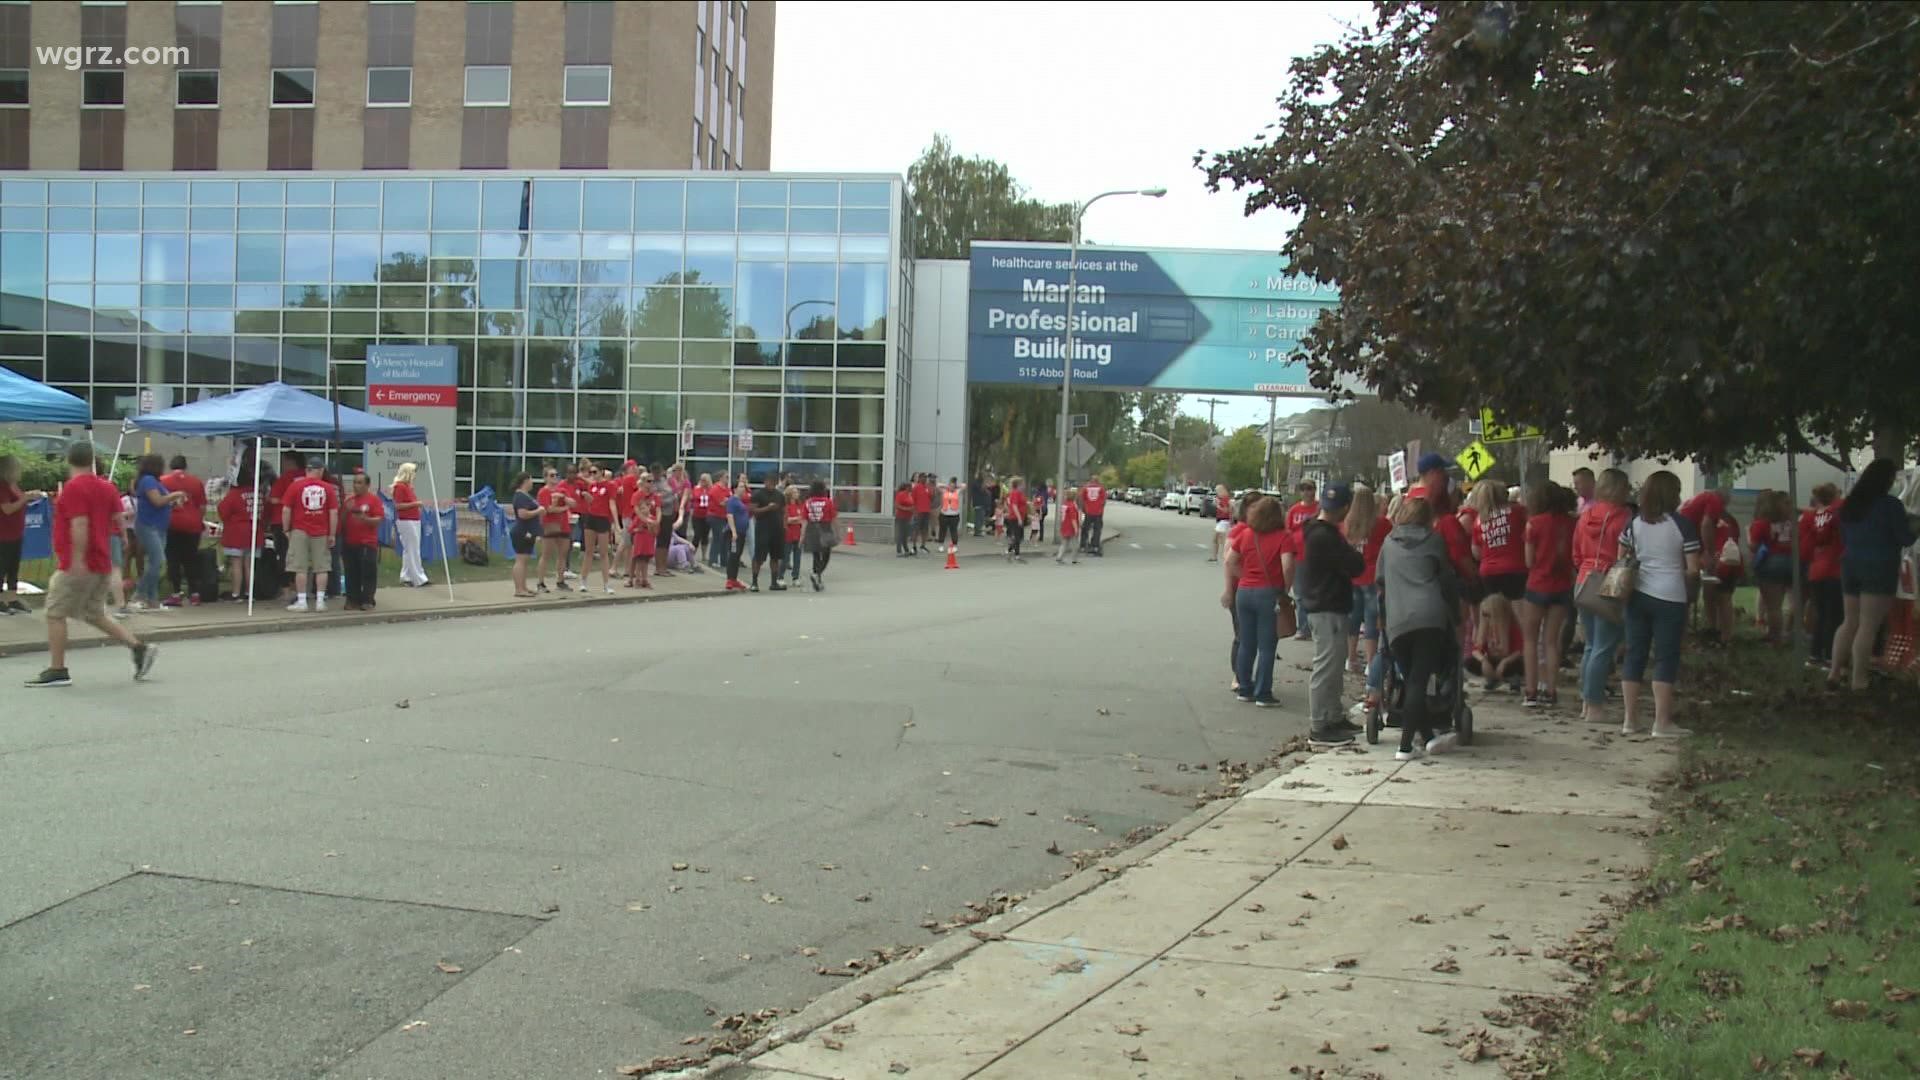 Day 11 of Union Workers on strike at Mercy hospital